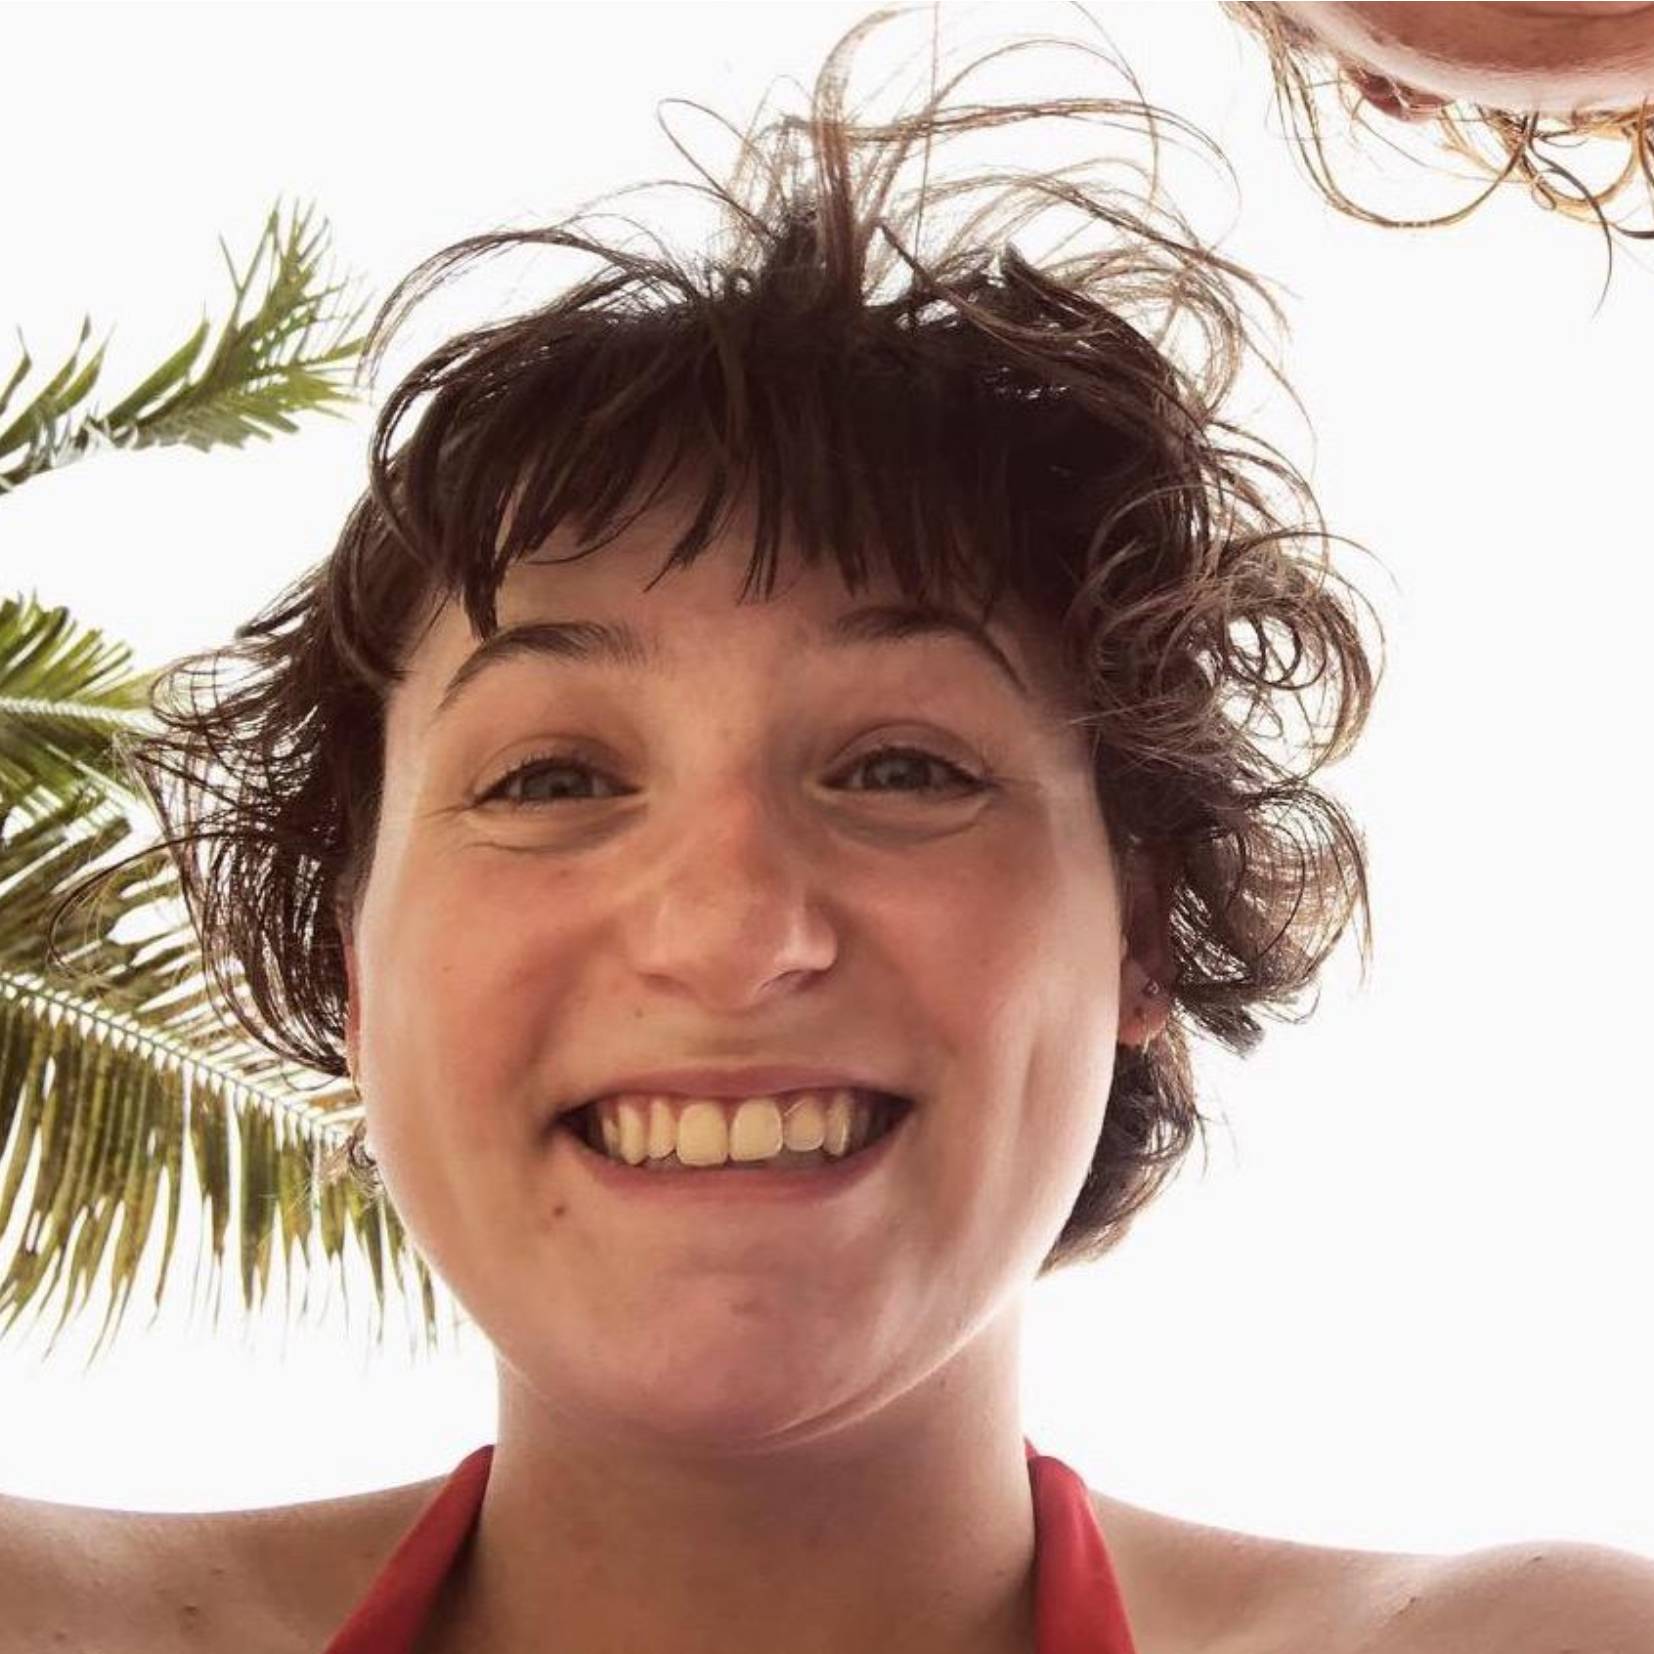 Smiling girl looking down at camera with palm trees in back